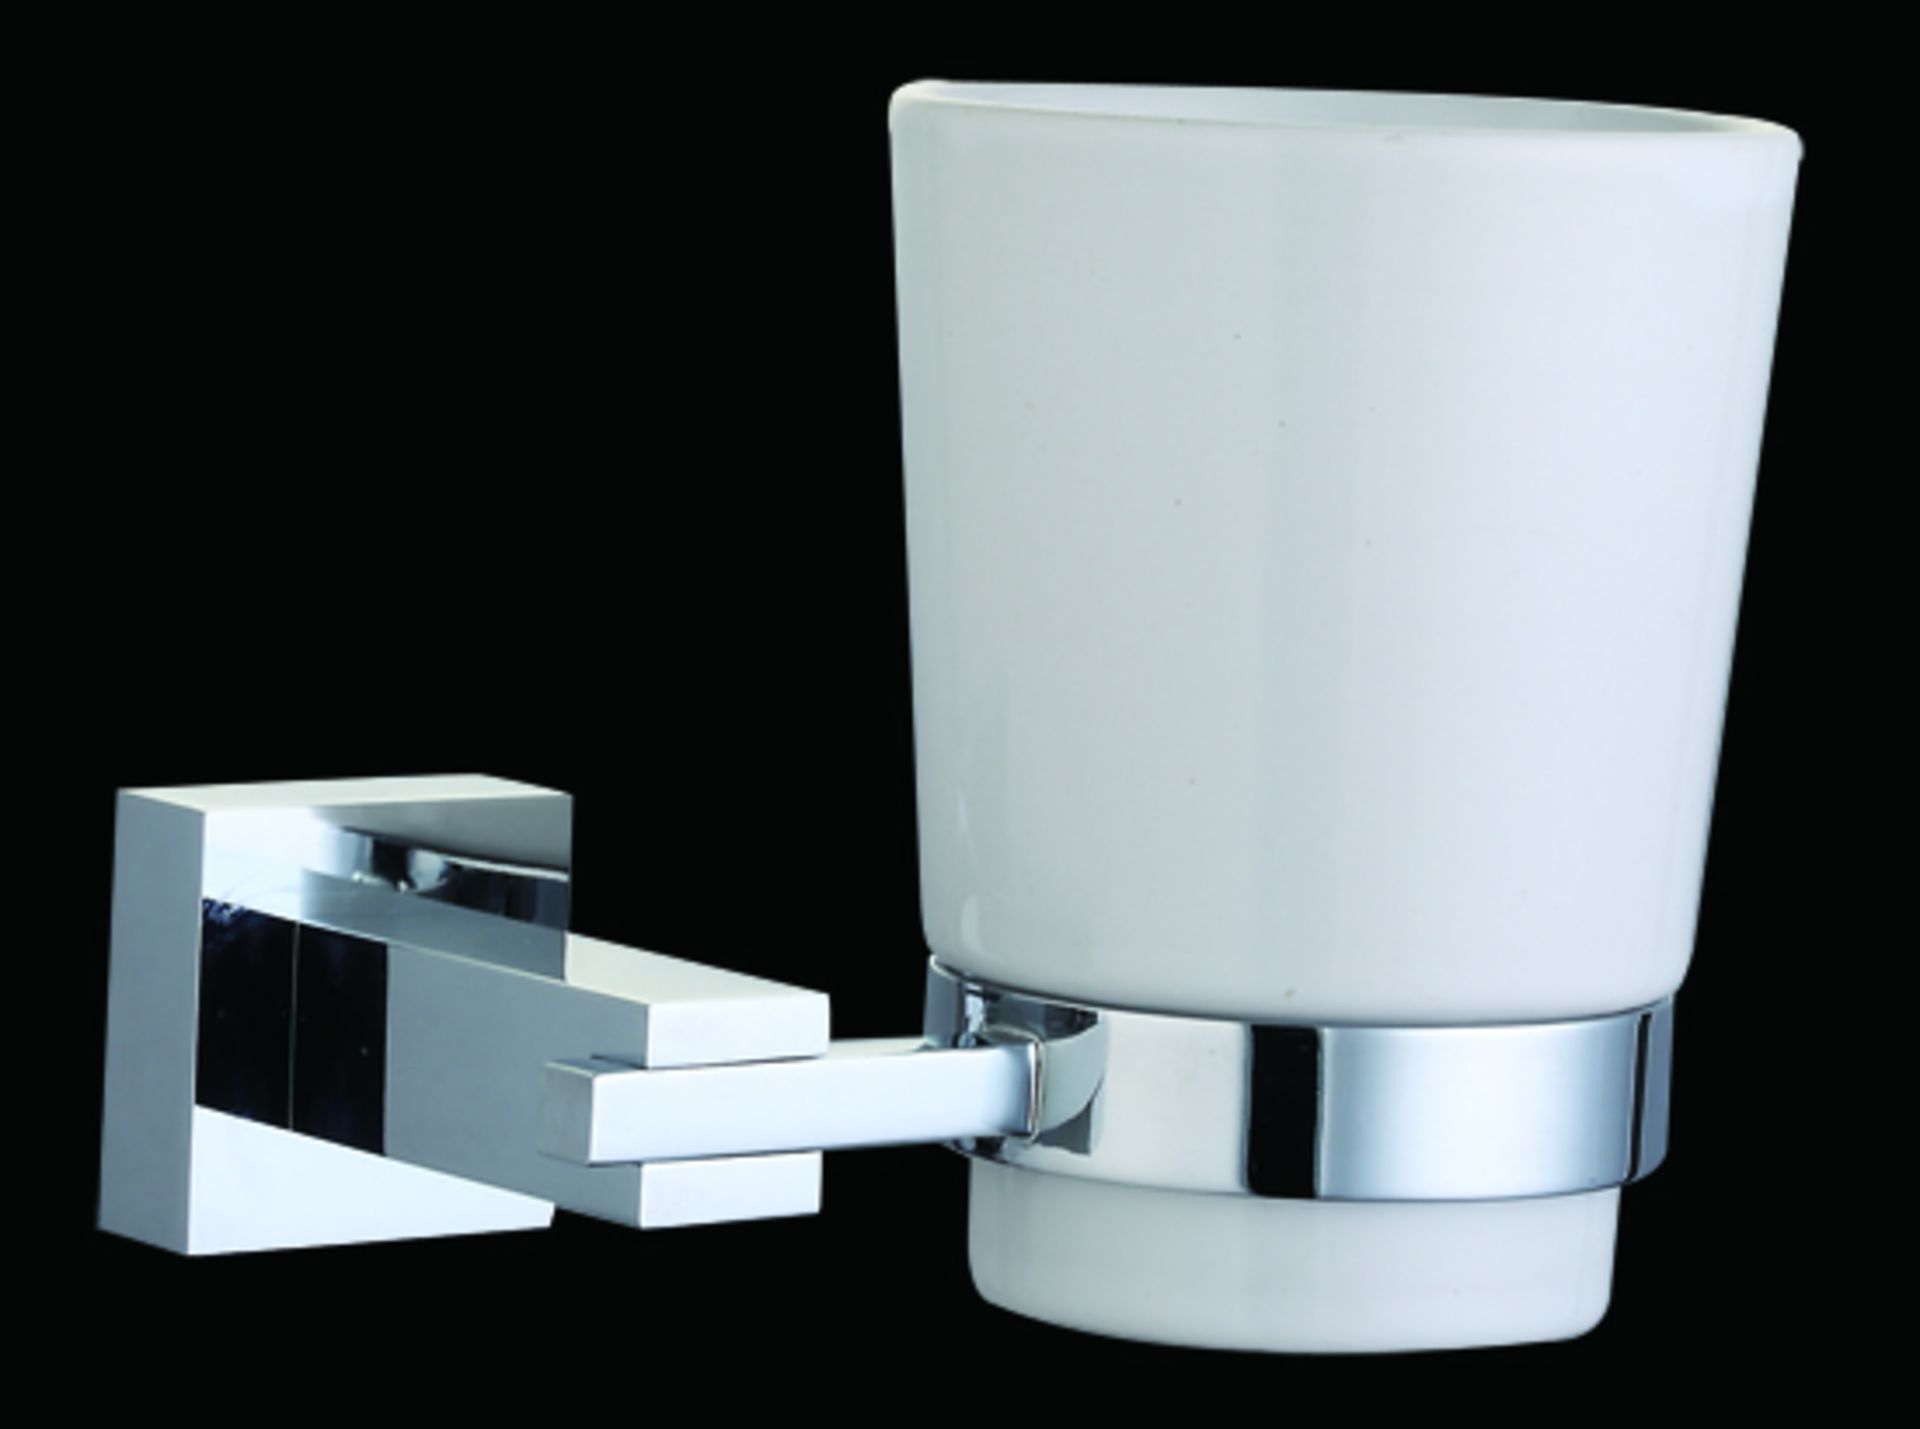 1 x Vogue Series 4 Six Piece Bathroom Accessory Set - Includes WC Roll Holder, Soap Dispenser, - Image 6 of 7